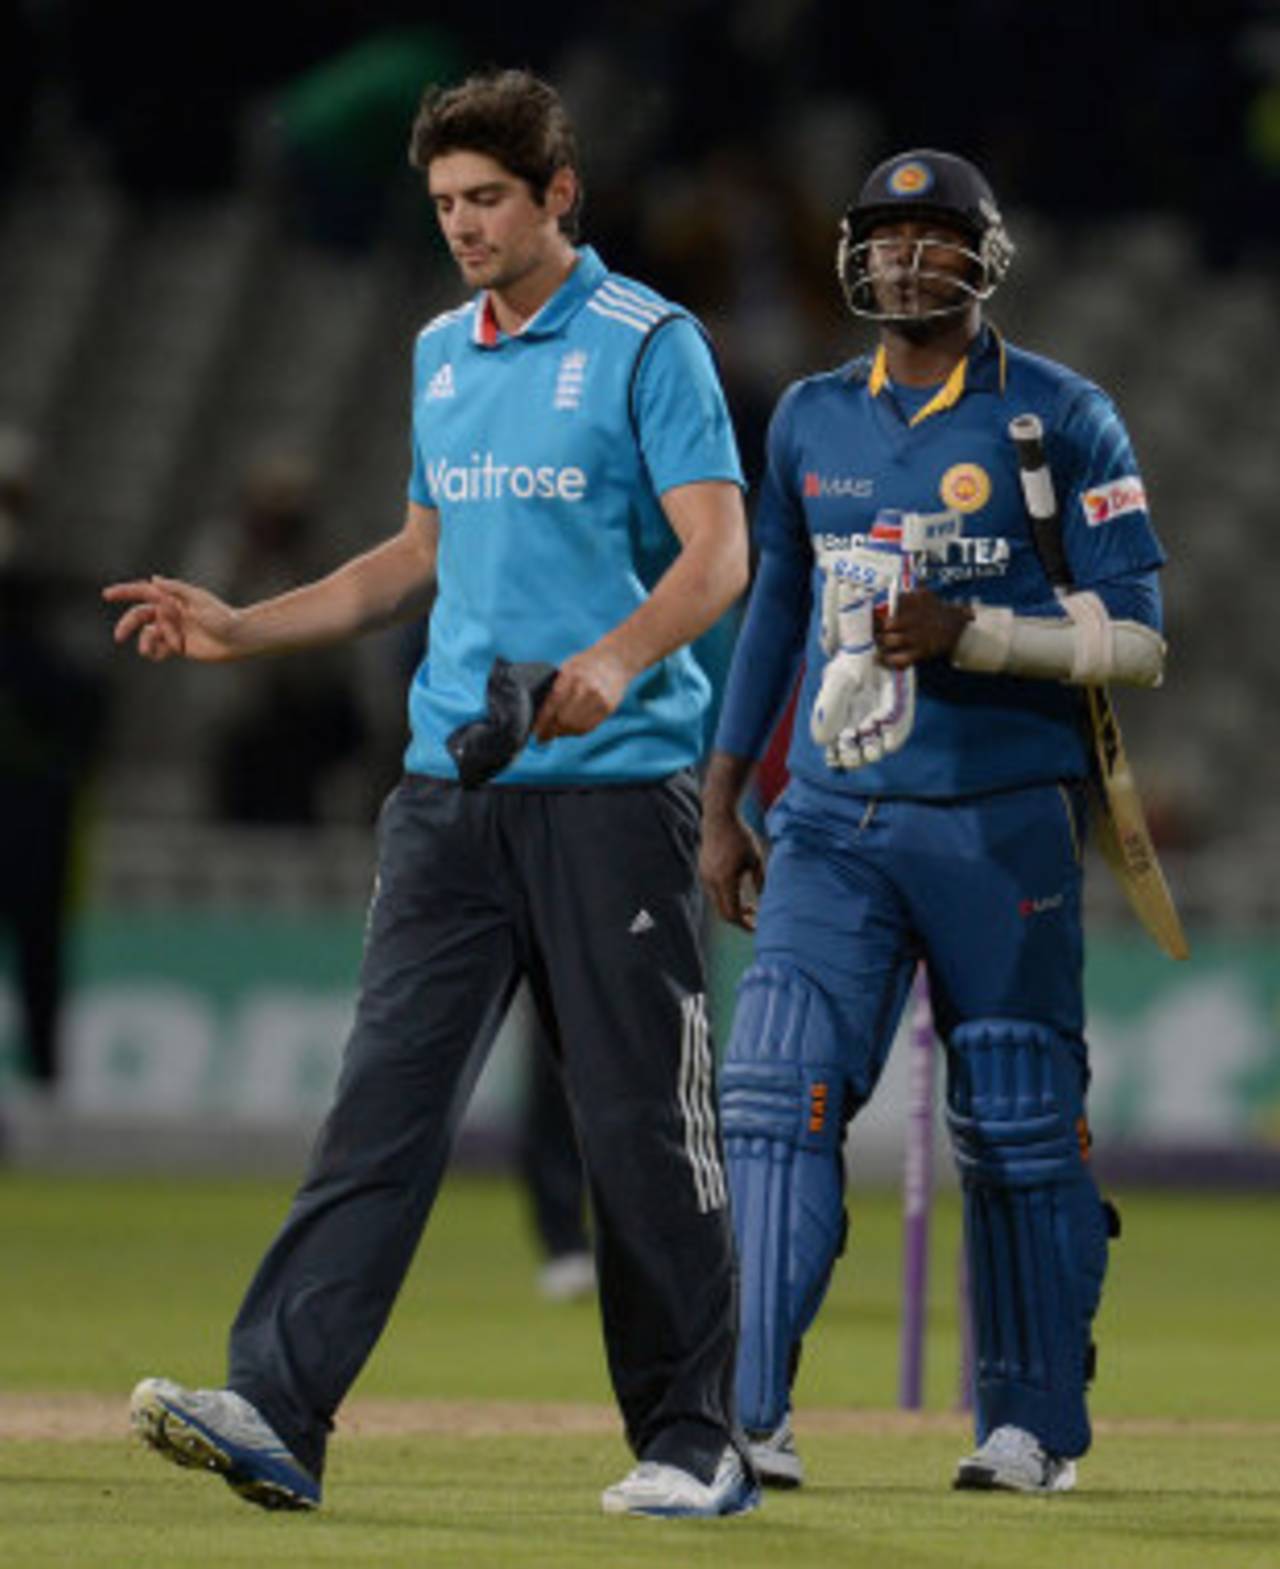 Alastair Cook was not happy at the end of the match, England v Sri Lanka, 5th ODI, Edgbaston, June 3, 2014